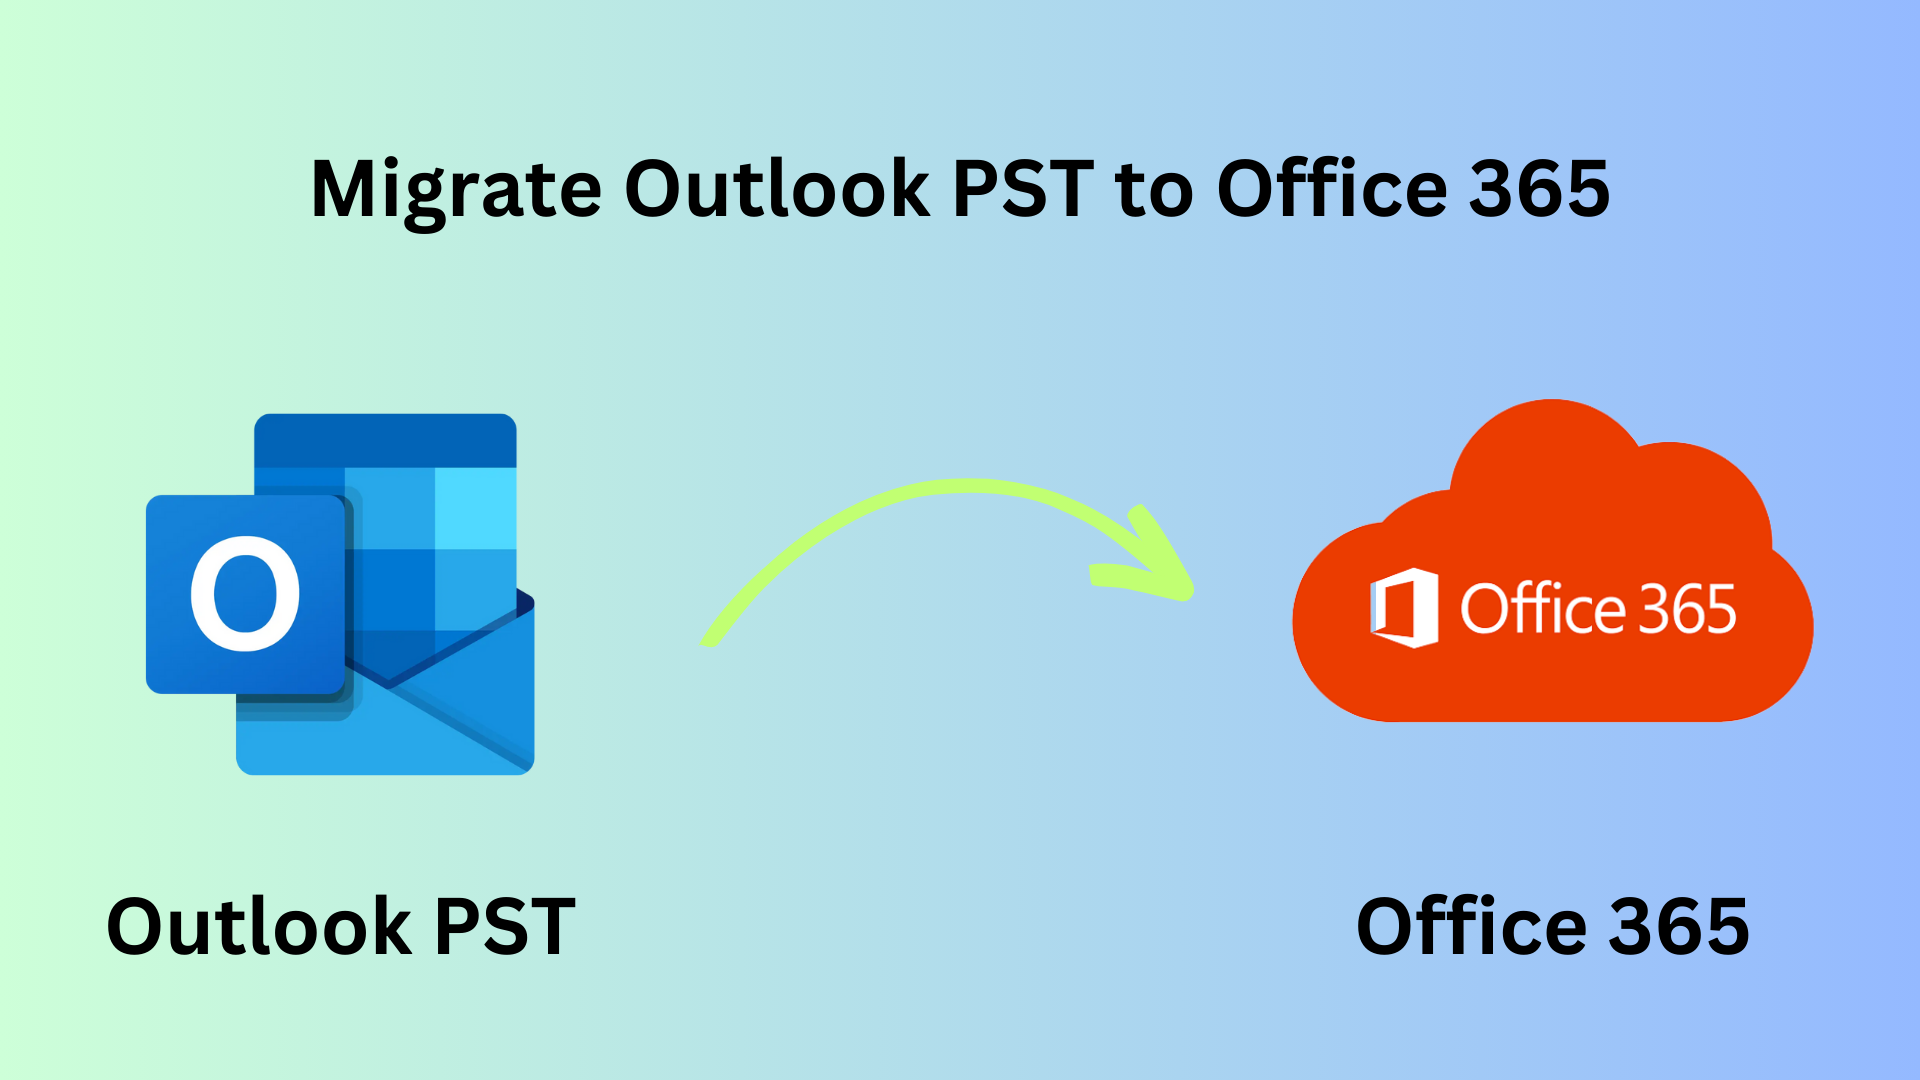 How to Migrate Outlook PST to Office 365